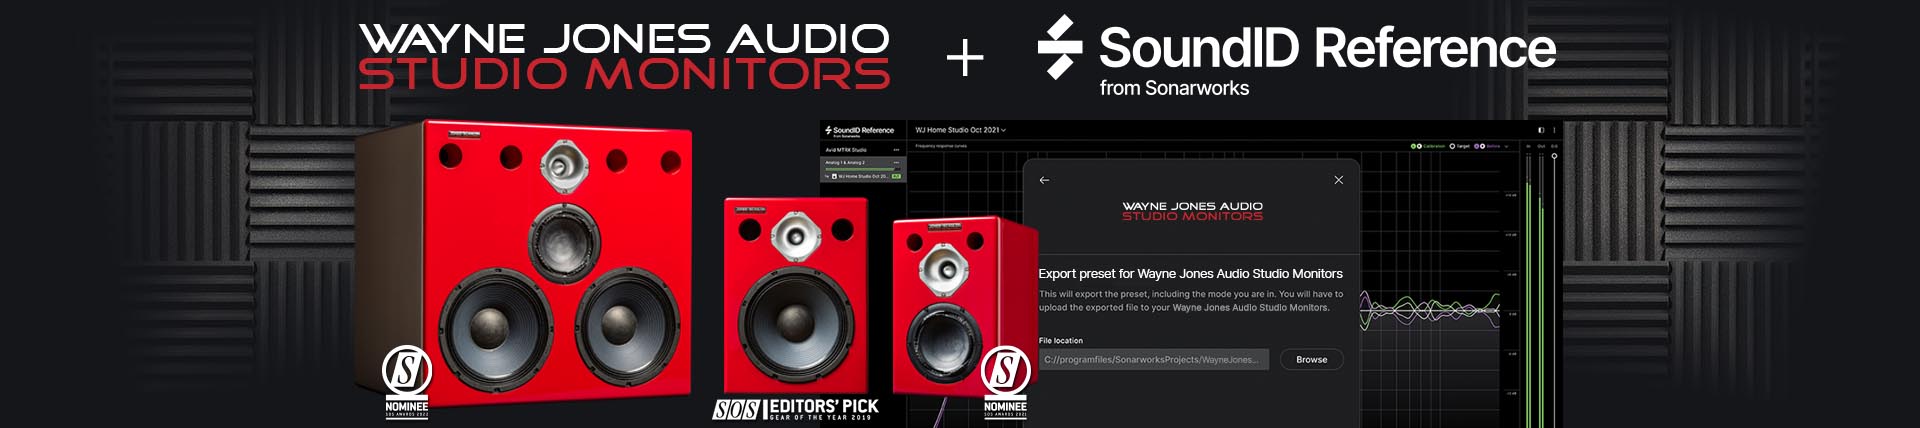 Proudly announcing a world first, with ground-breaking innovative technology achieved in partnership with Sonarworks. Upload and store room calibration profiles directly into the monitors up to 10,000 times.